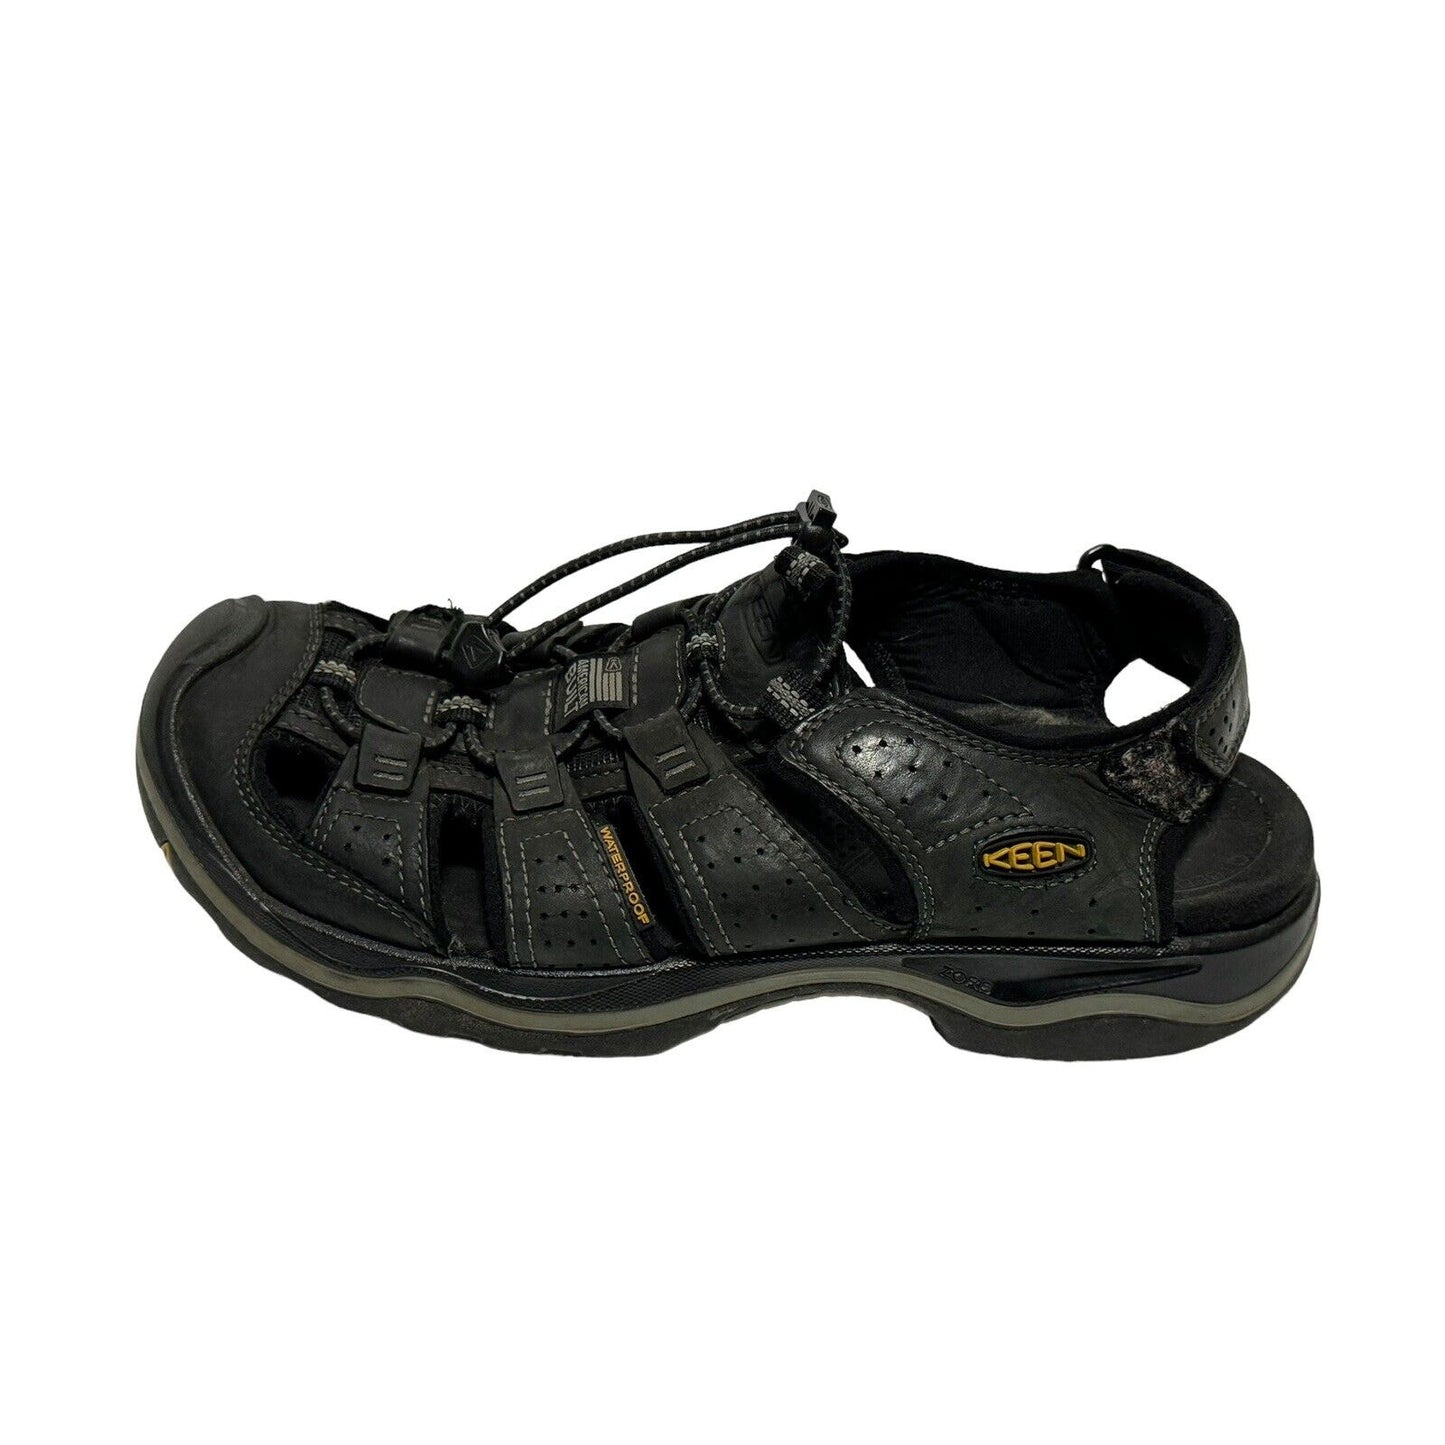 Keen Rialto Waterproof Closed Toe Leather Hiking Water Sandals Size 9.5